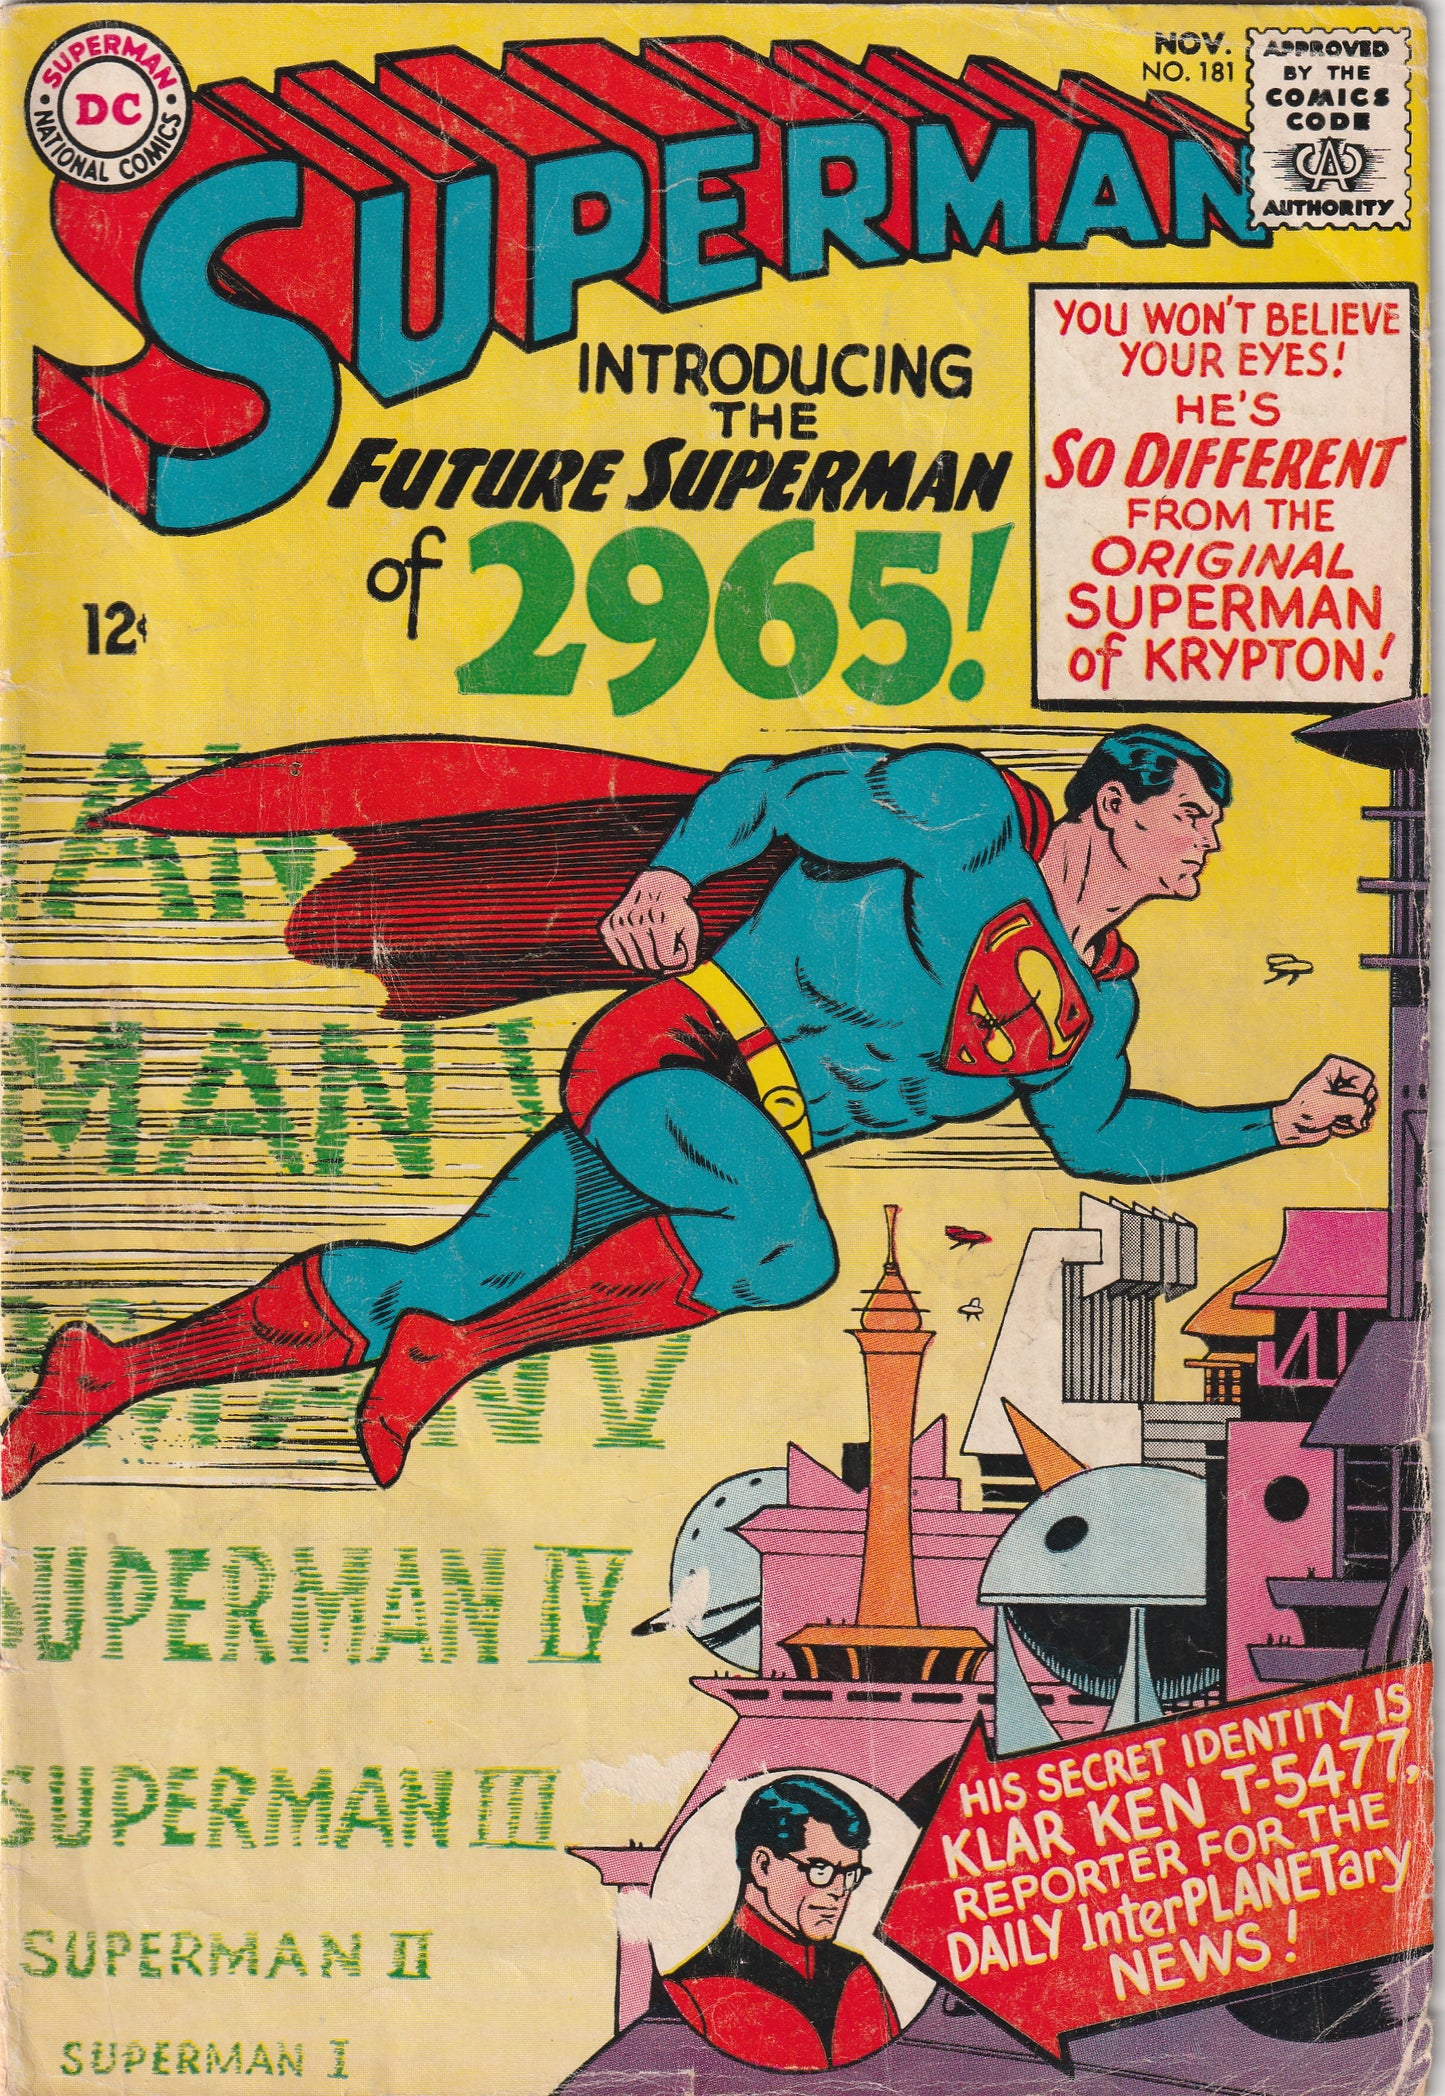 Superman #181 (1965) - 1st Year 2965 story/series